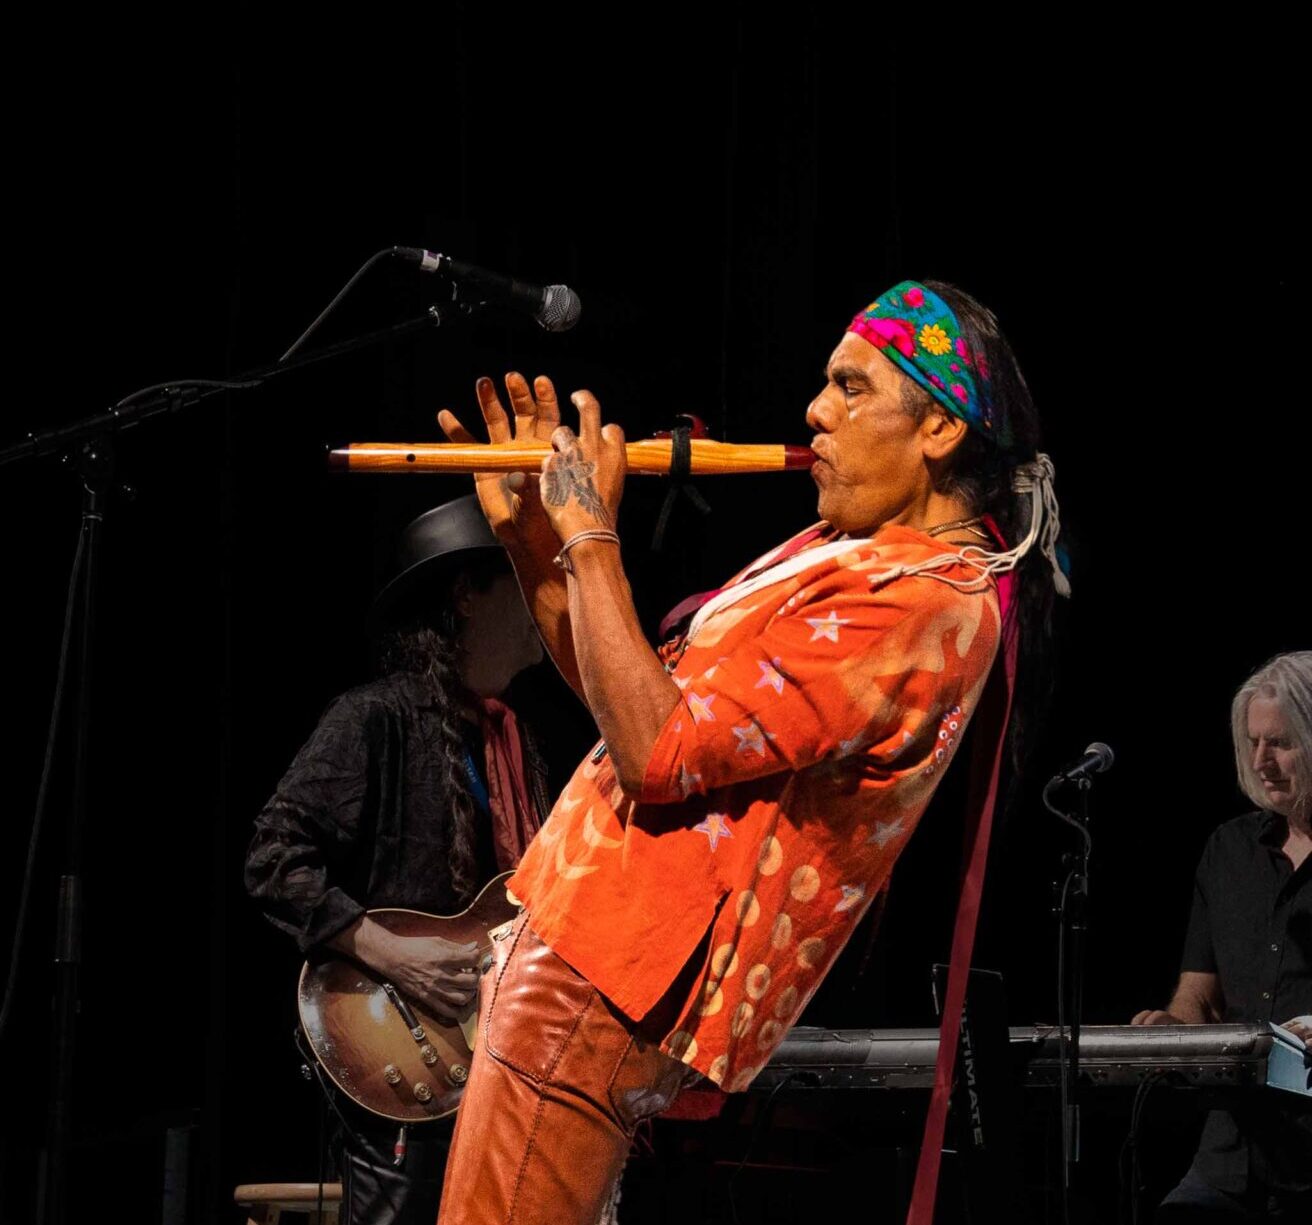 A man playing a flute on a stage.